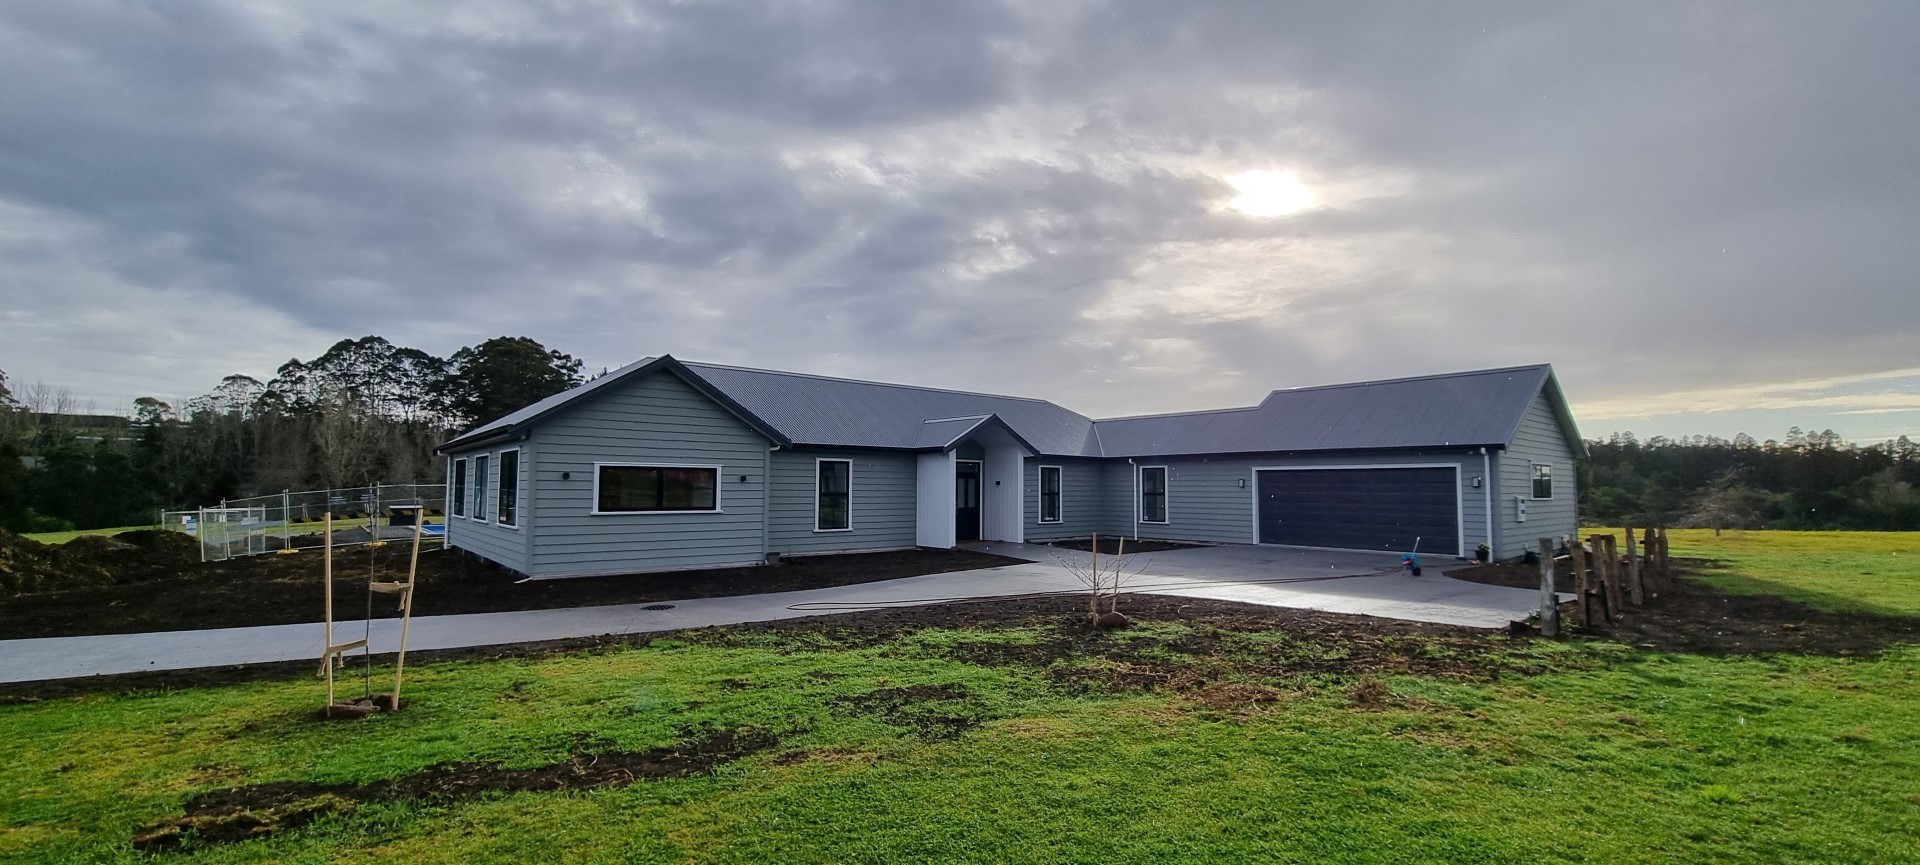 completed-house-arcline-architecture-kerikeri-design-family-home